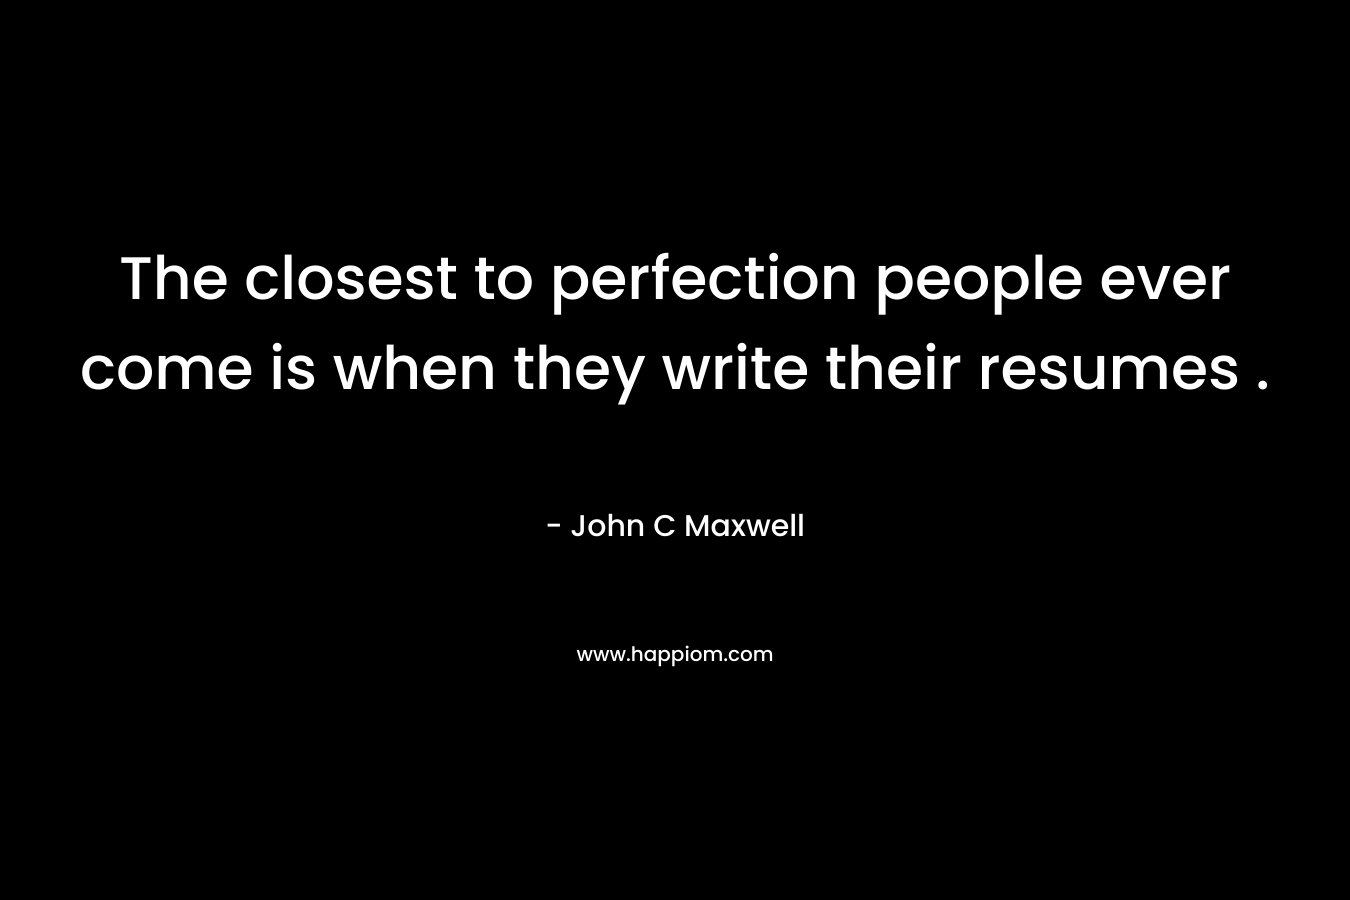 The closest to perfection people ever come is when they write their resumes .